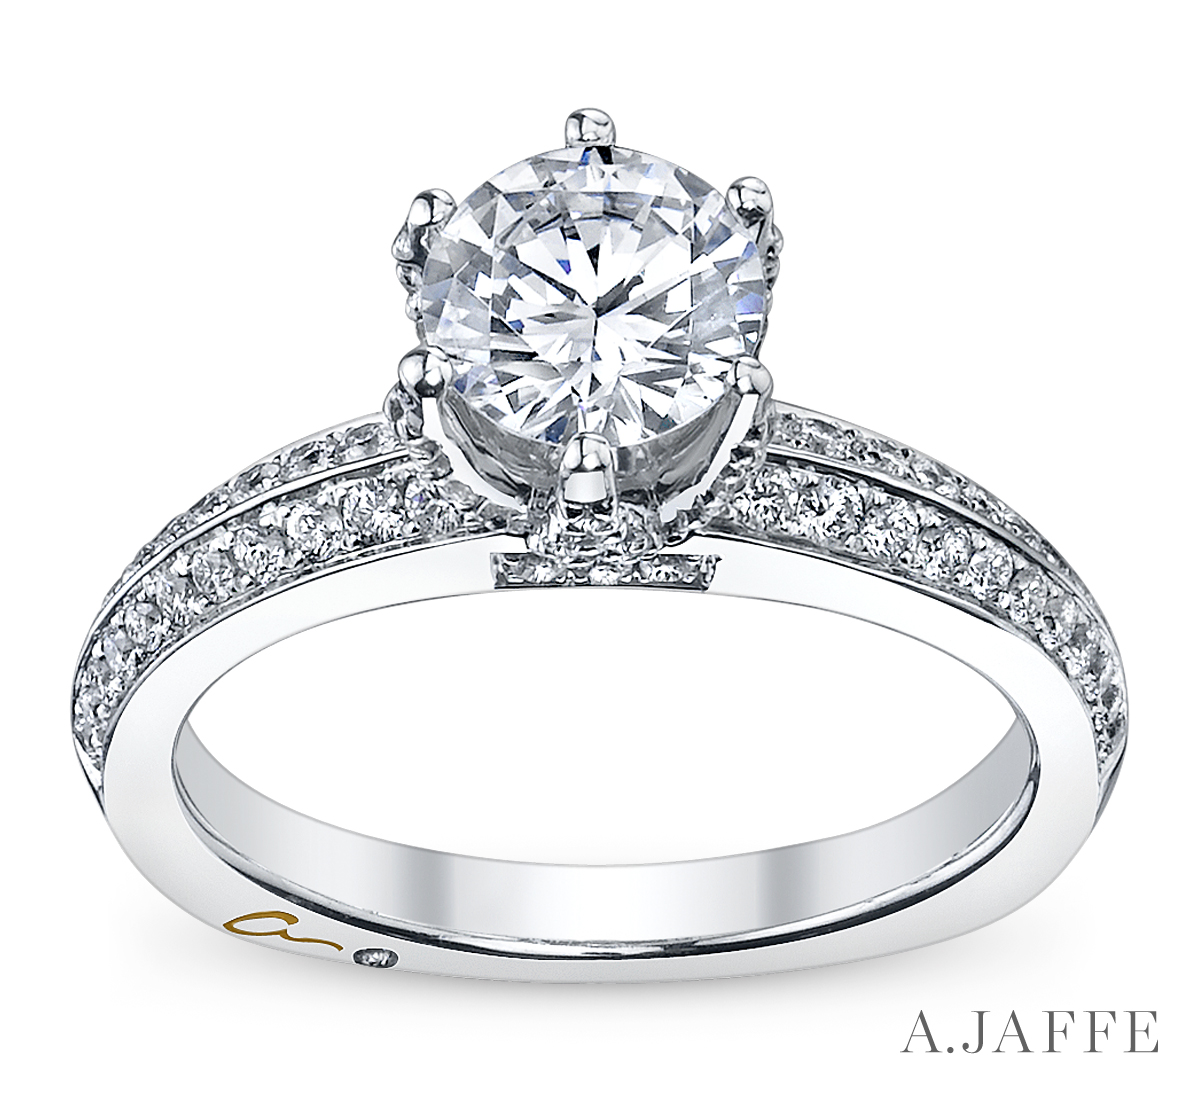 Engagement Ring of the Dayâ€“A. Jaffe